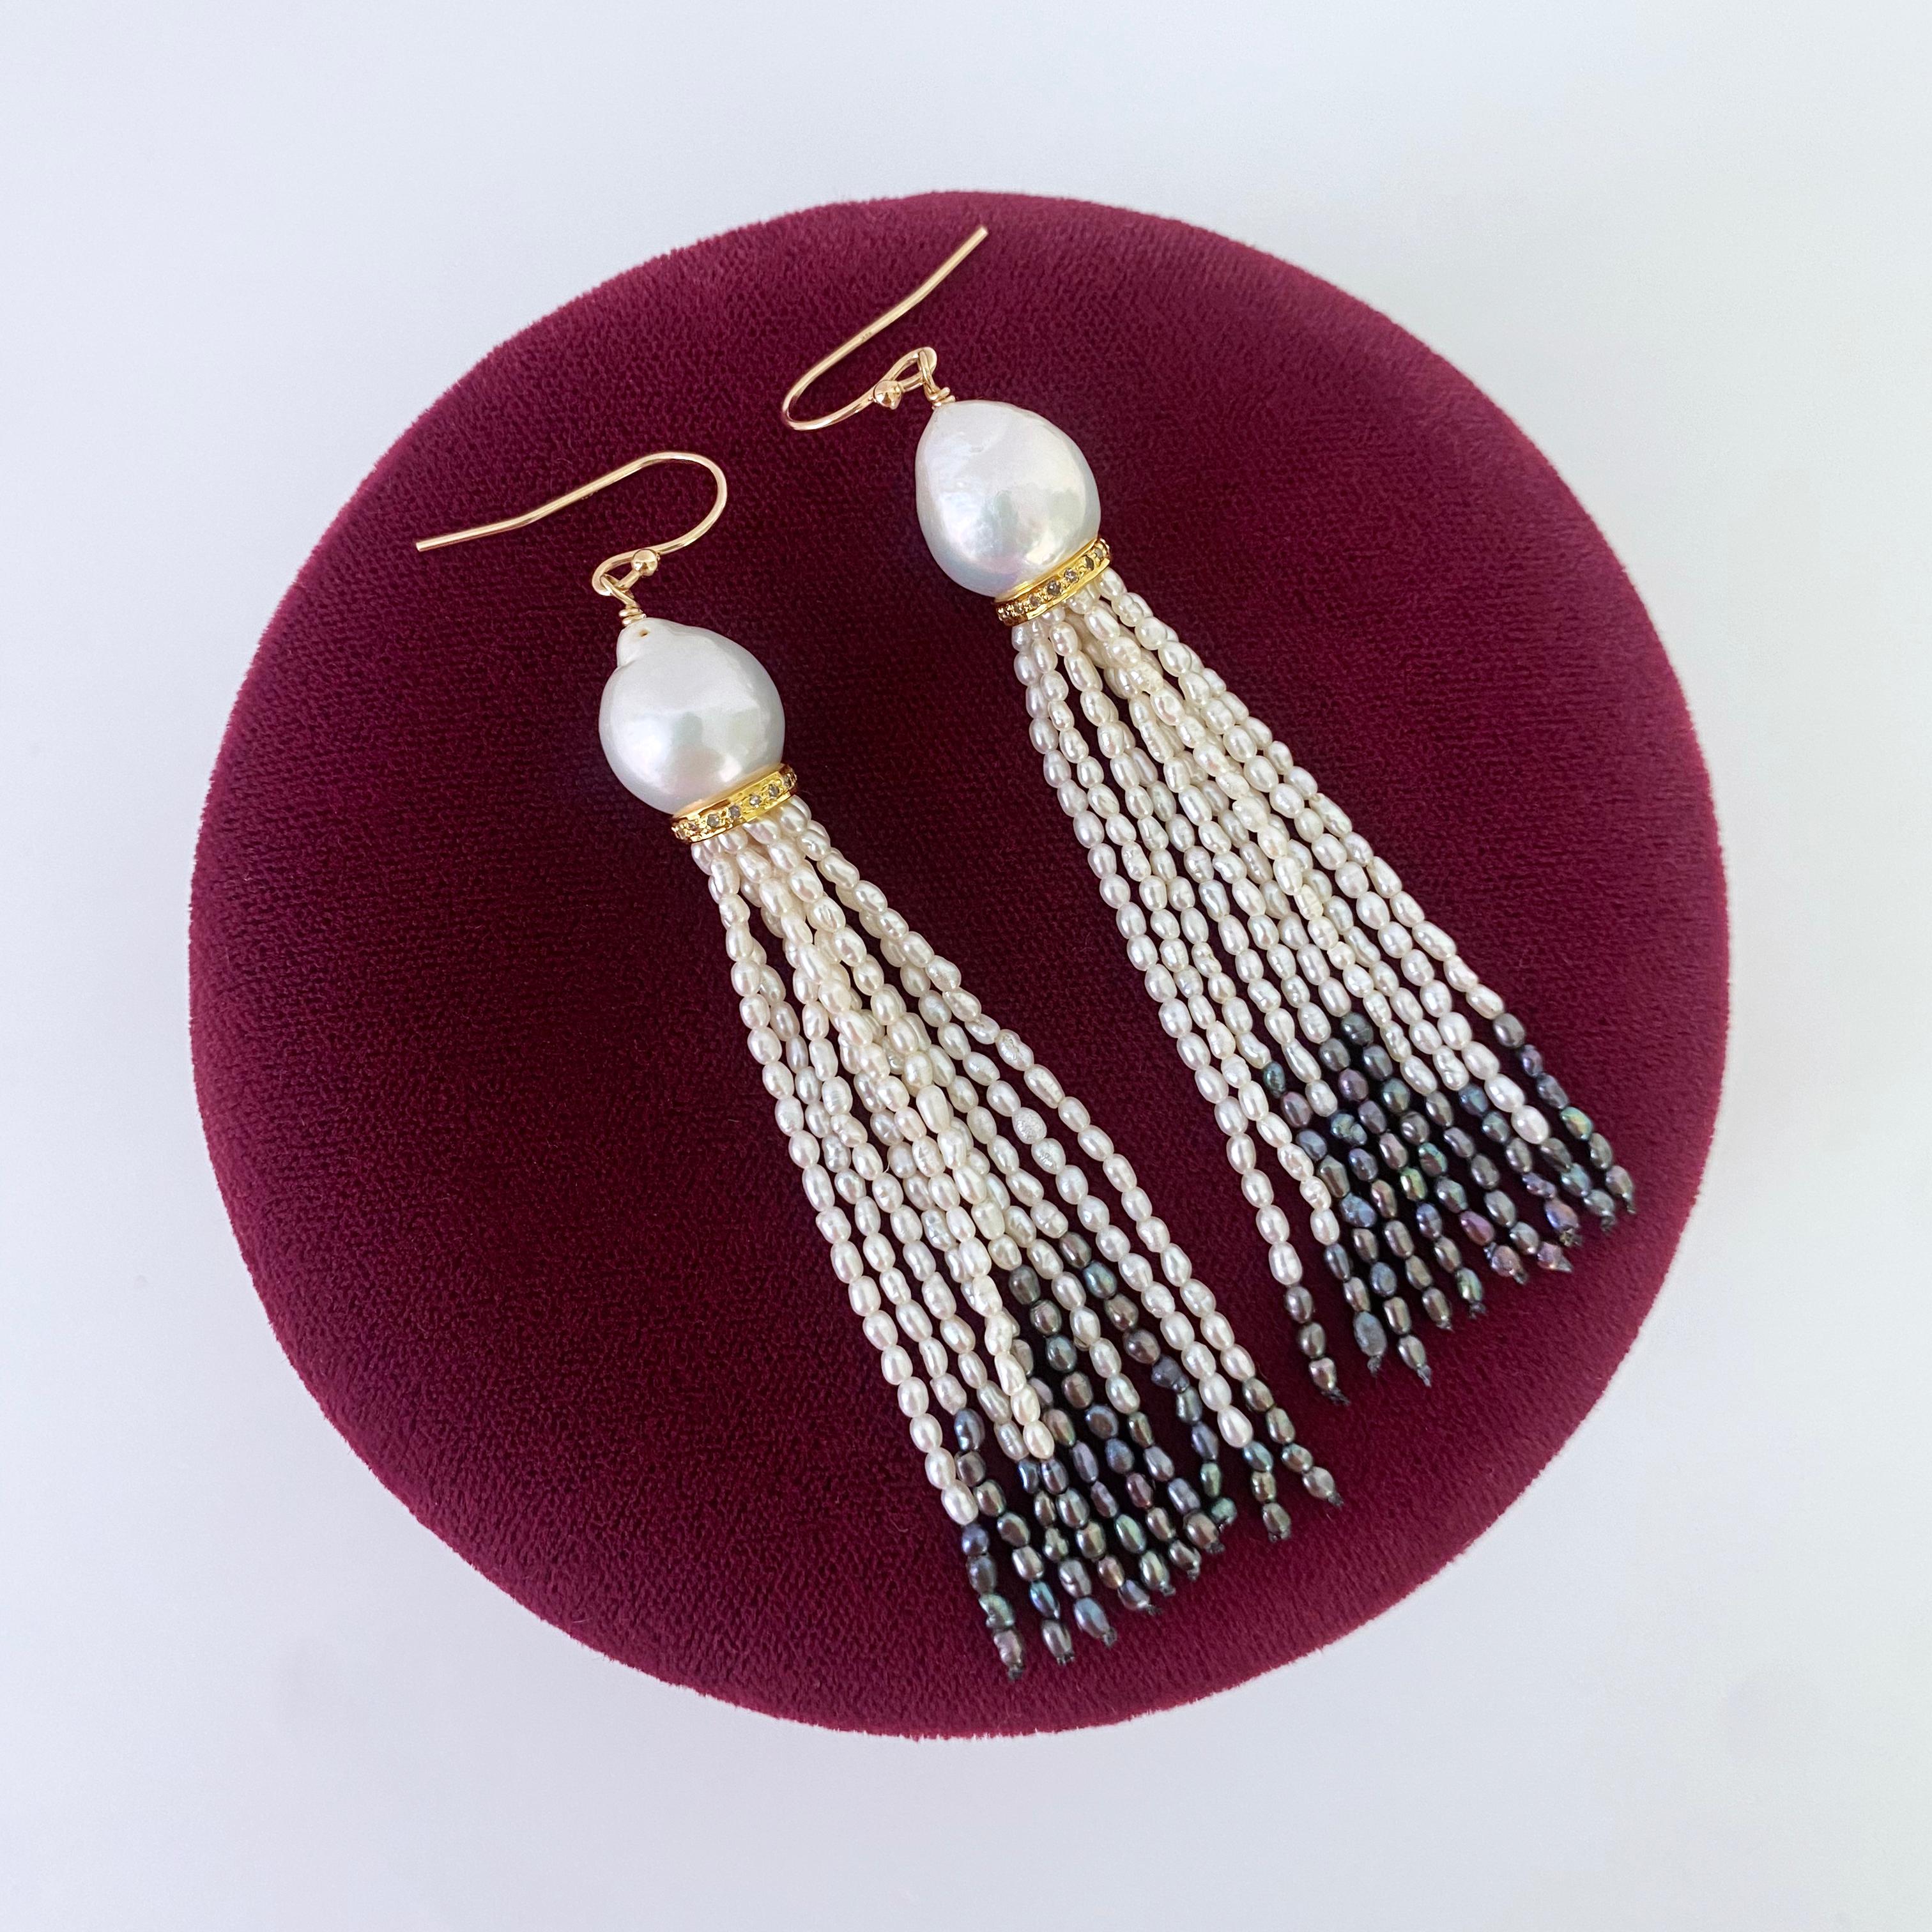 Marina J. Solid 14k & Pearl Earrings with Ombre Tassels In New Condition For Sale In Los Angeles, CA